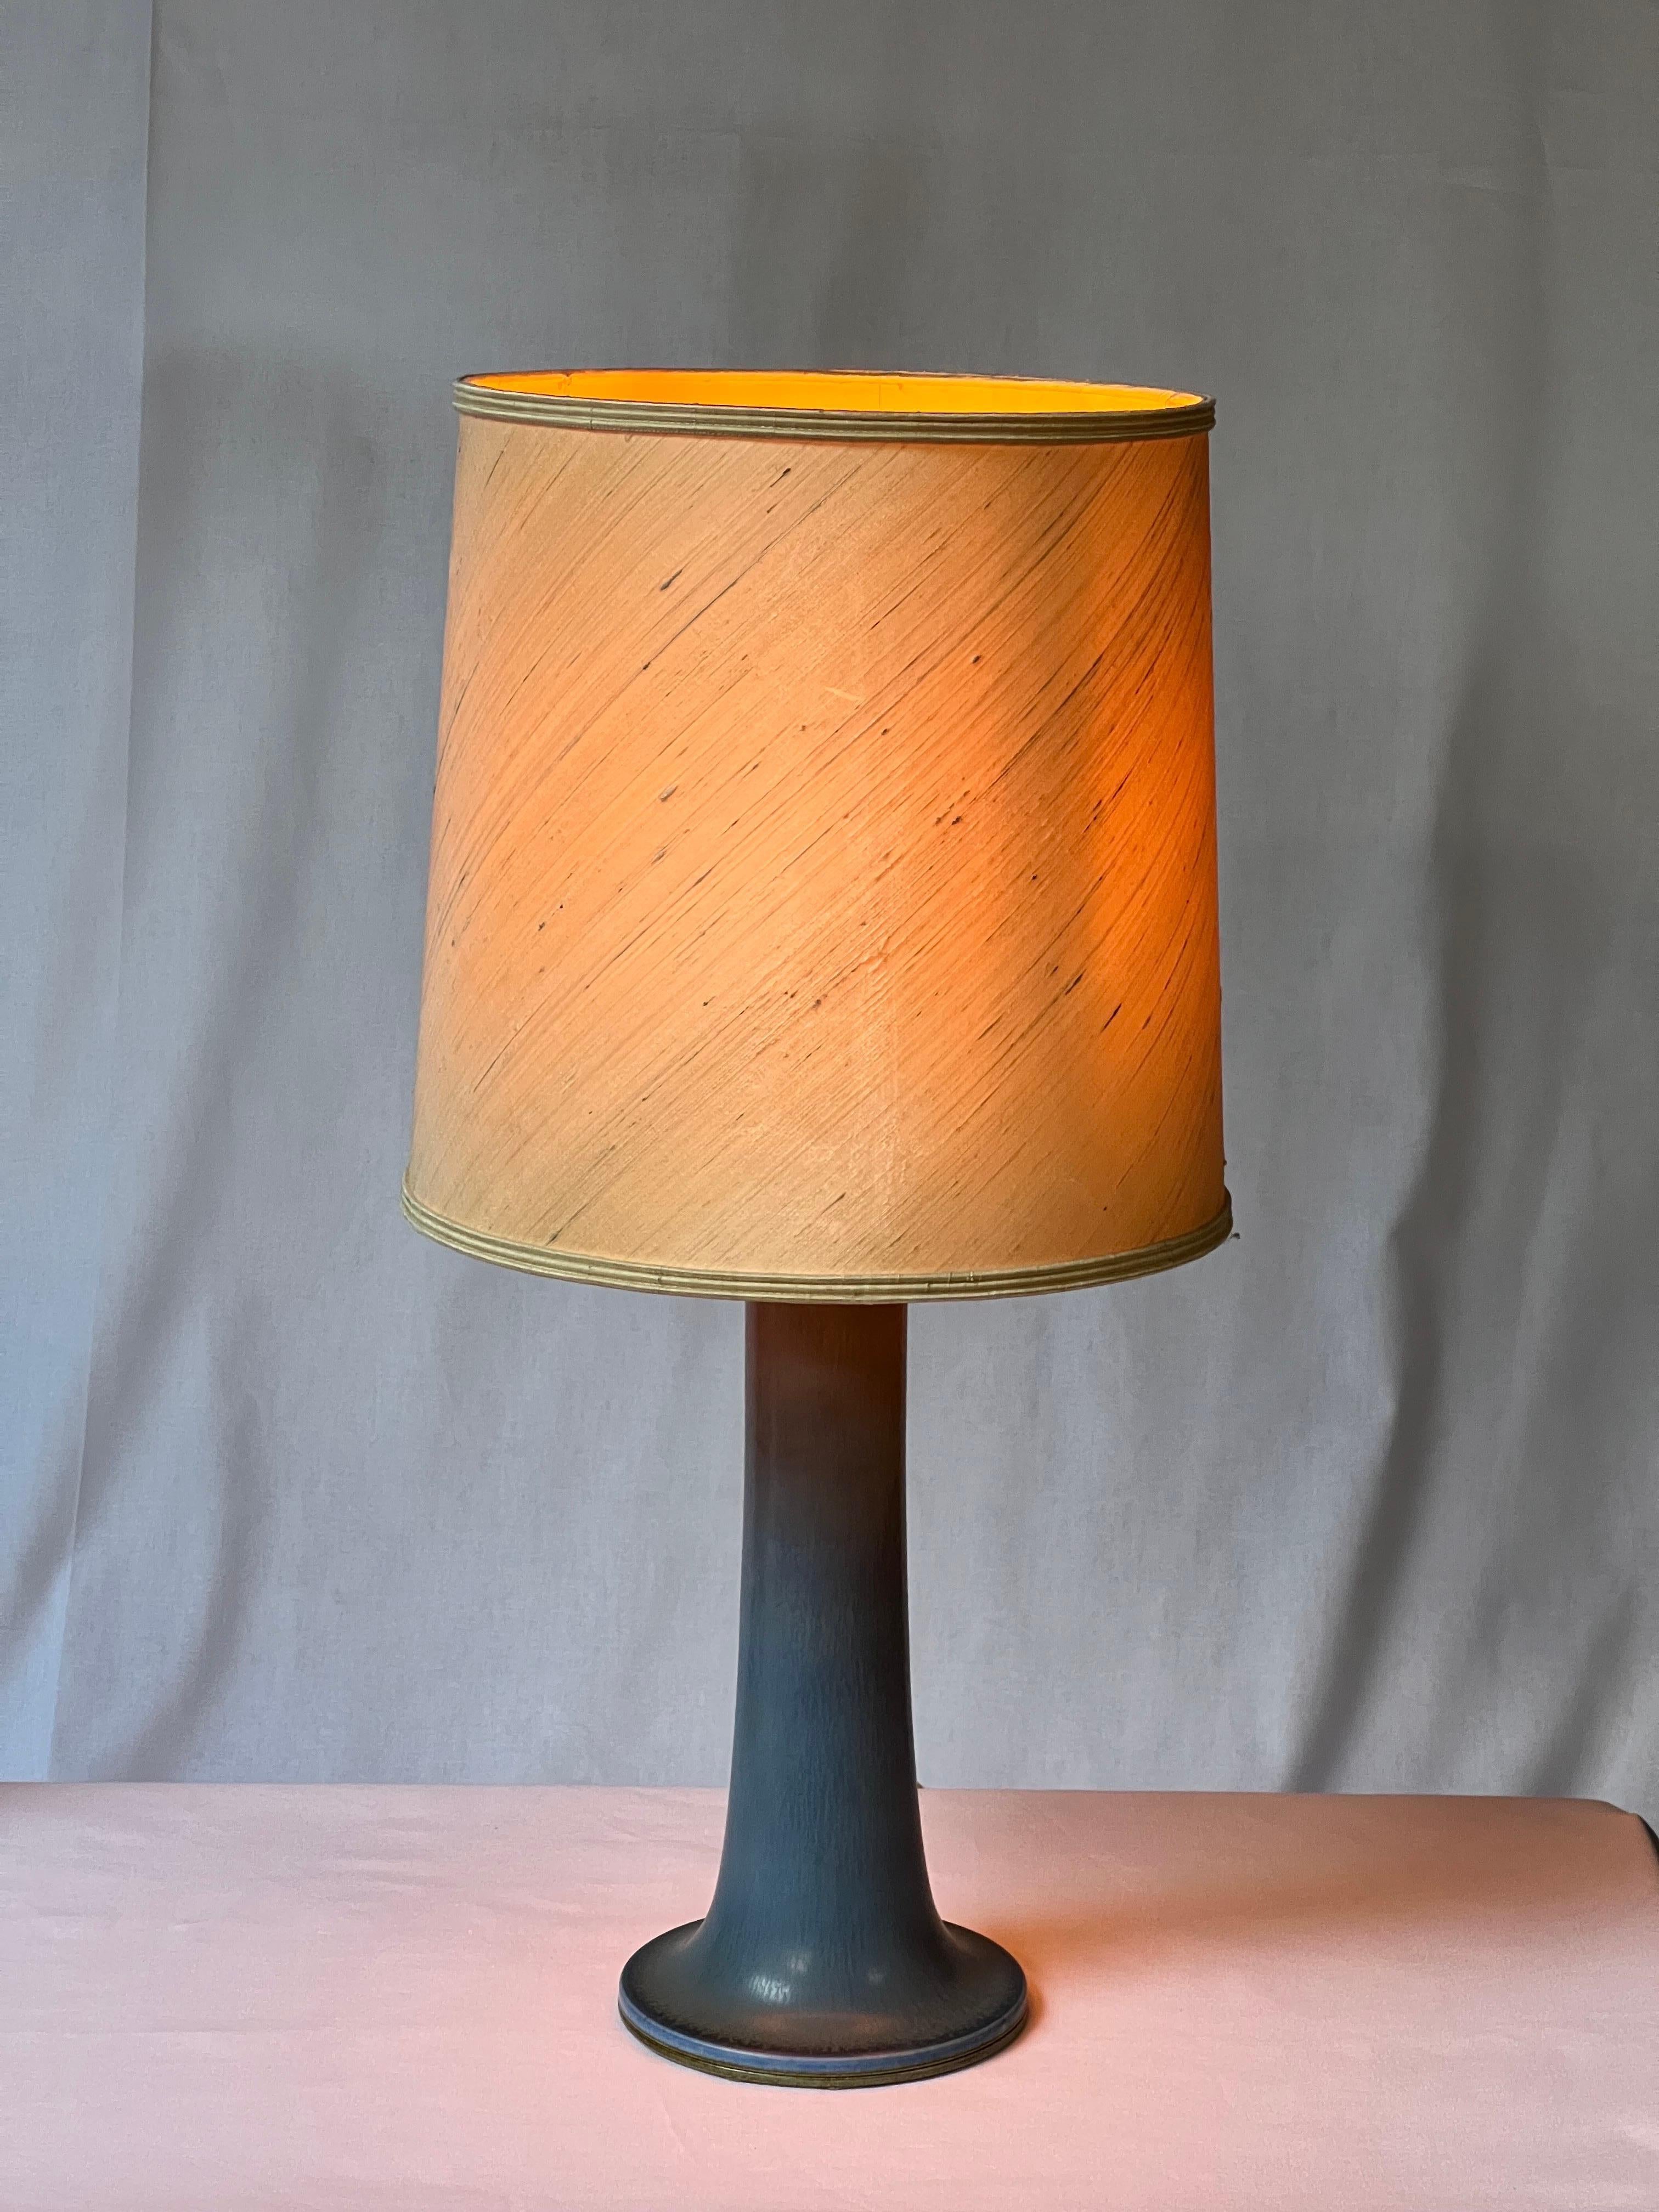 This is a very unique table lamp made by hand with a blue glaze. Impressive measurements. Lamps are very hard to find from this artist, a real must have. This is a real lamp not a vase that was transformed later. You can see the glaze around the